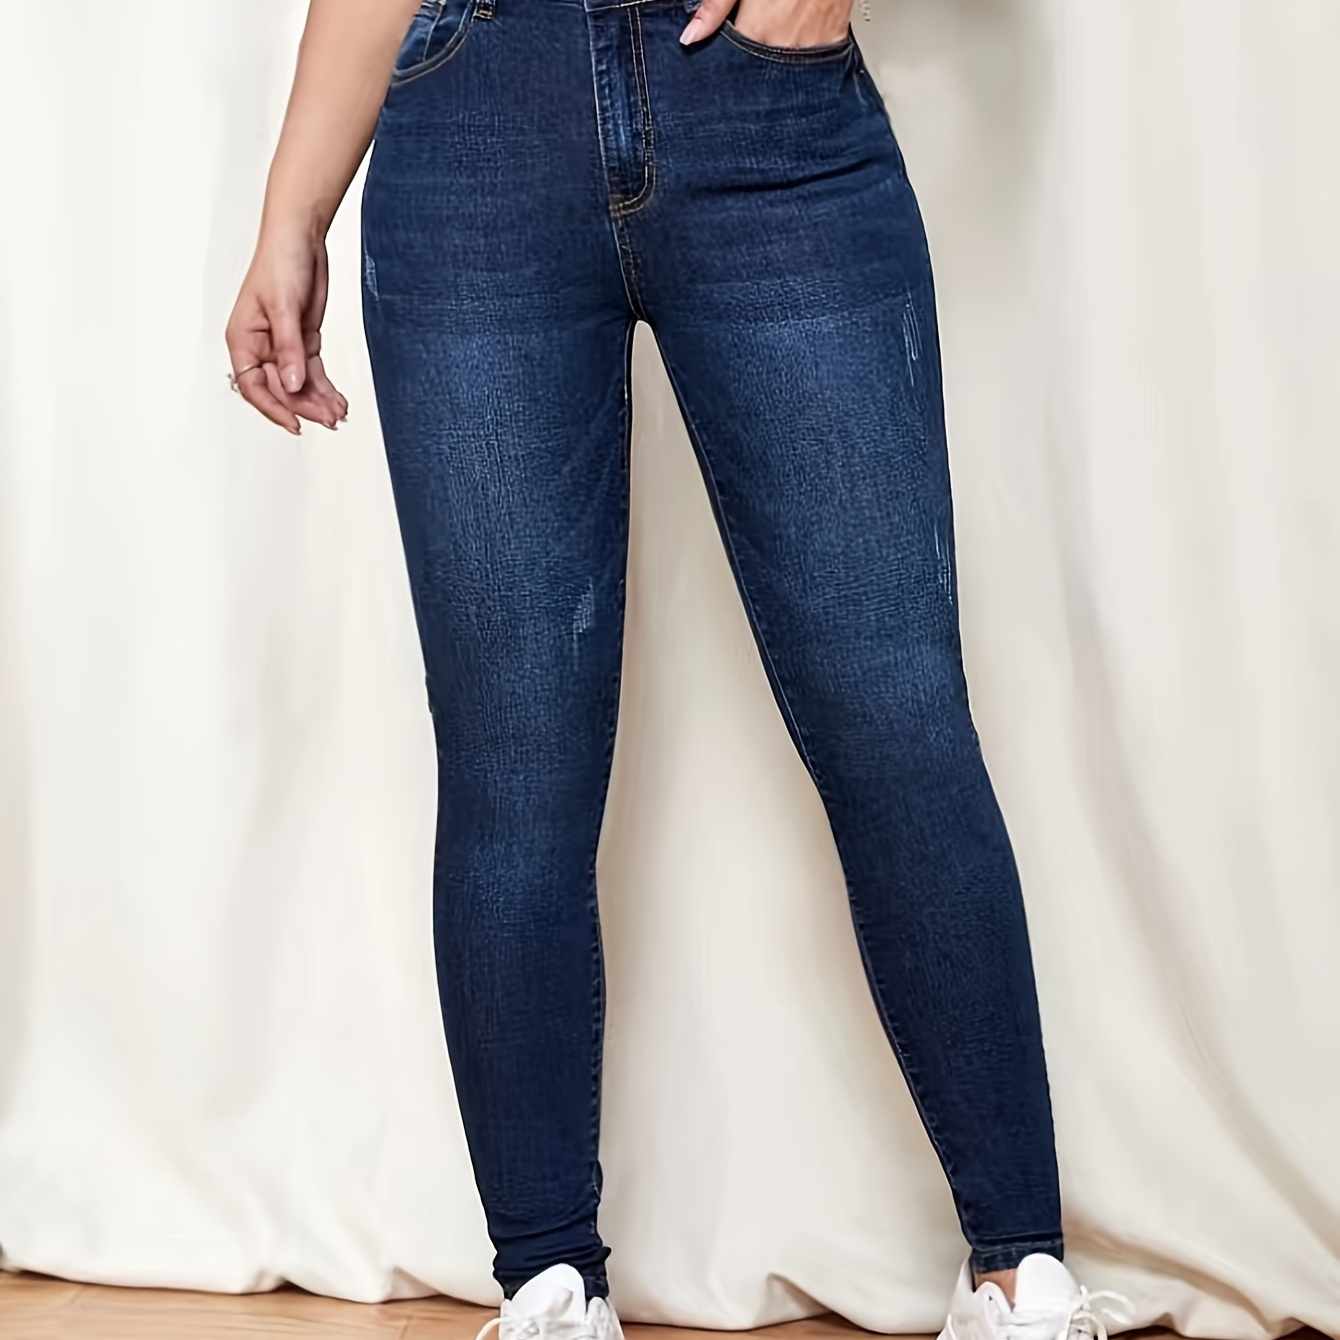 

Women's Plain Skinny Fit Jeans, Elegant Style, Washed Denim With Slash Pockets, Stretchable Fabric, Casual Fashion - Perfect For Fall & Winter